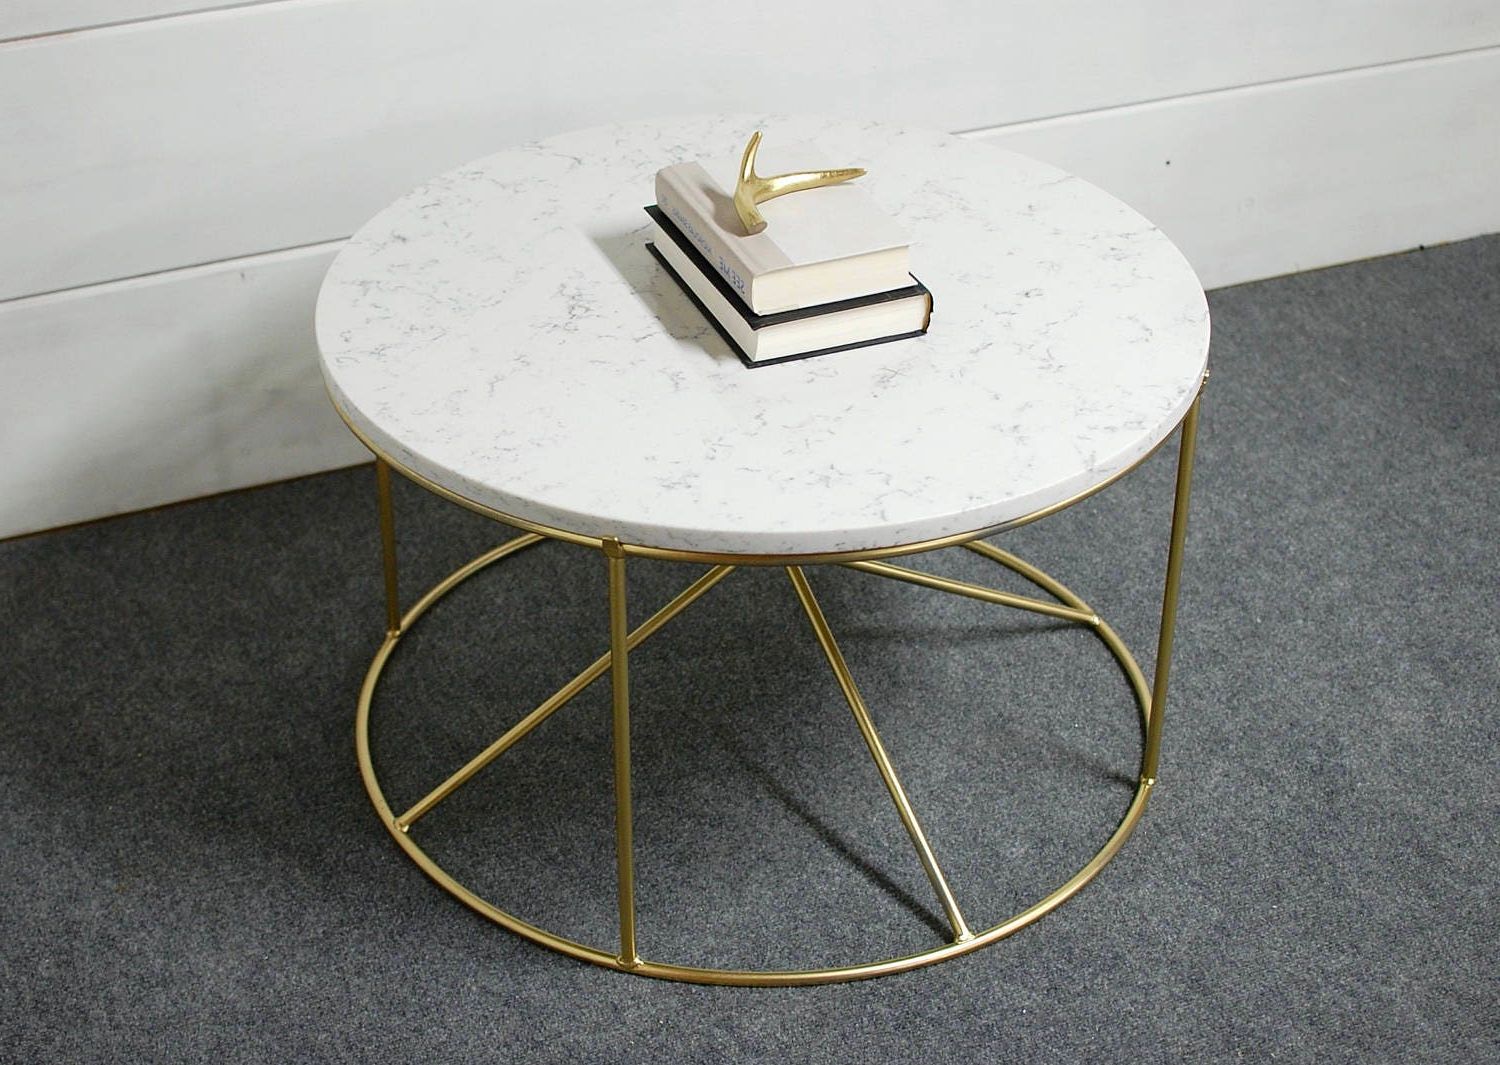 2018 Round White Marble Coffee Table Round Coffee Table Within White Marble Gold Metal Coffee Tables (View 20 of 20)